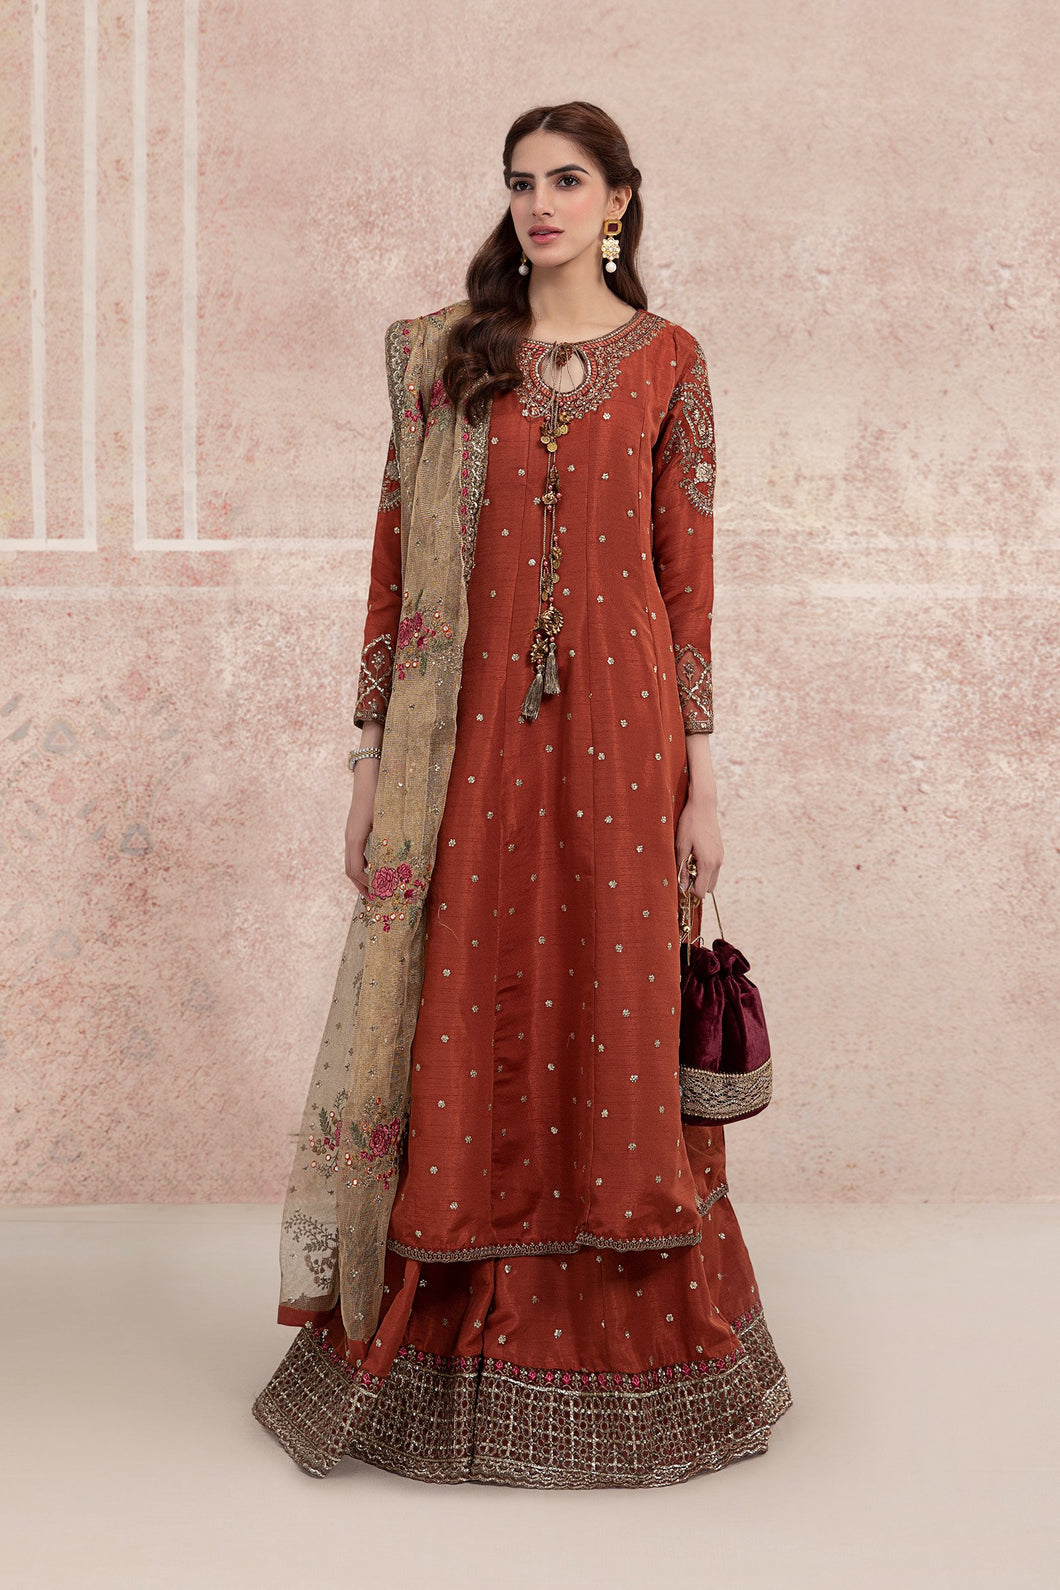 Buy Maria B Suit Rust SF-W21-10 Rust color Ready to Wear. READY MADE MARIA B BRIDAL COLLECTION UK 2021 Rejoice this season with balance of dynamic hues with  Pakistani Wedding designer clothes 2021 from the top fashion designer such as MARIA. B online in UK & USA Express shipping to London Manchester & worldwide 